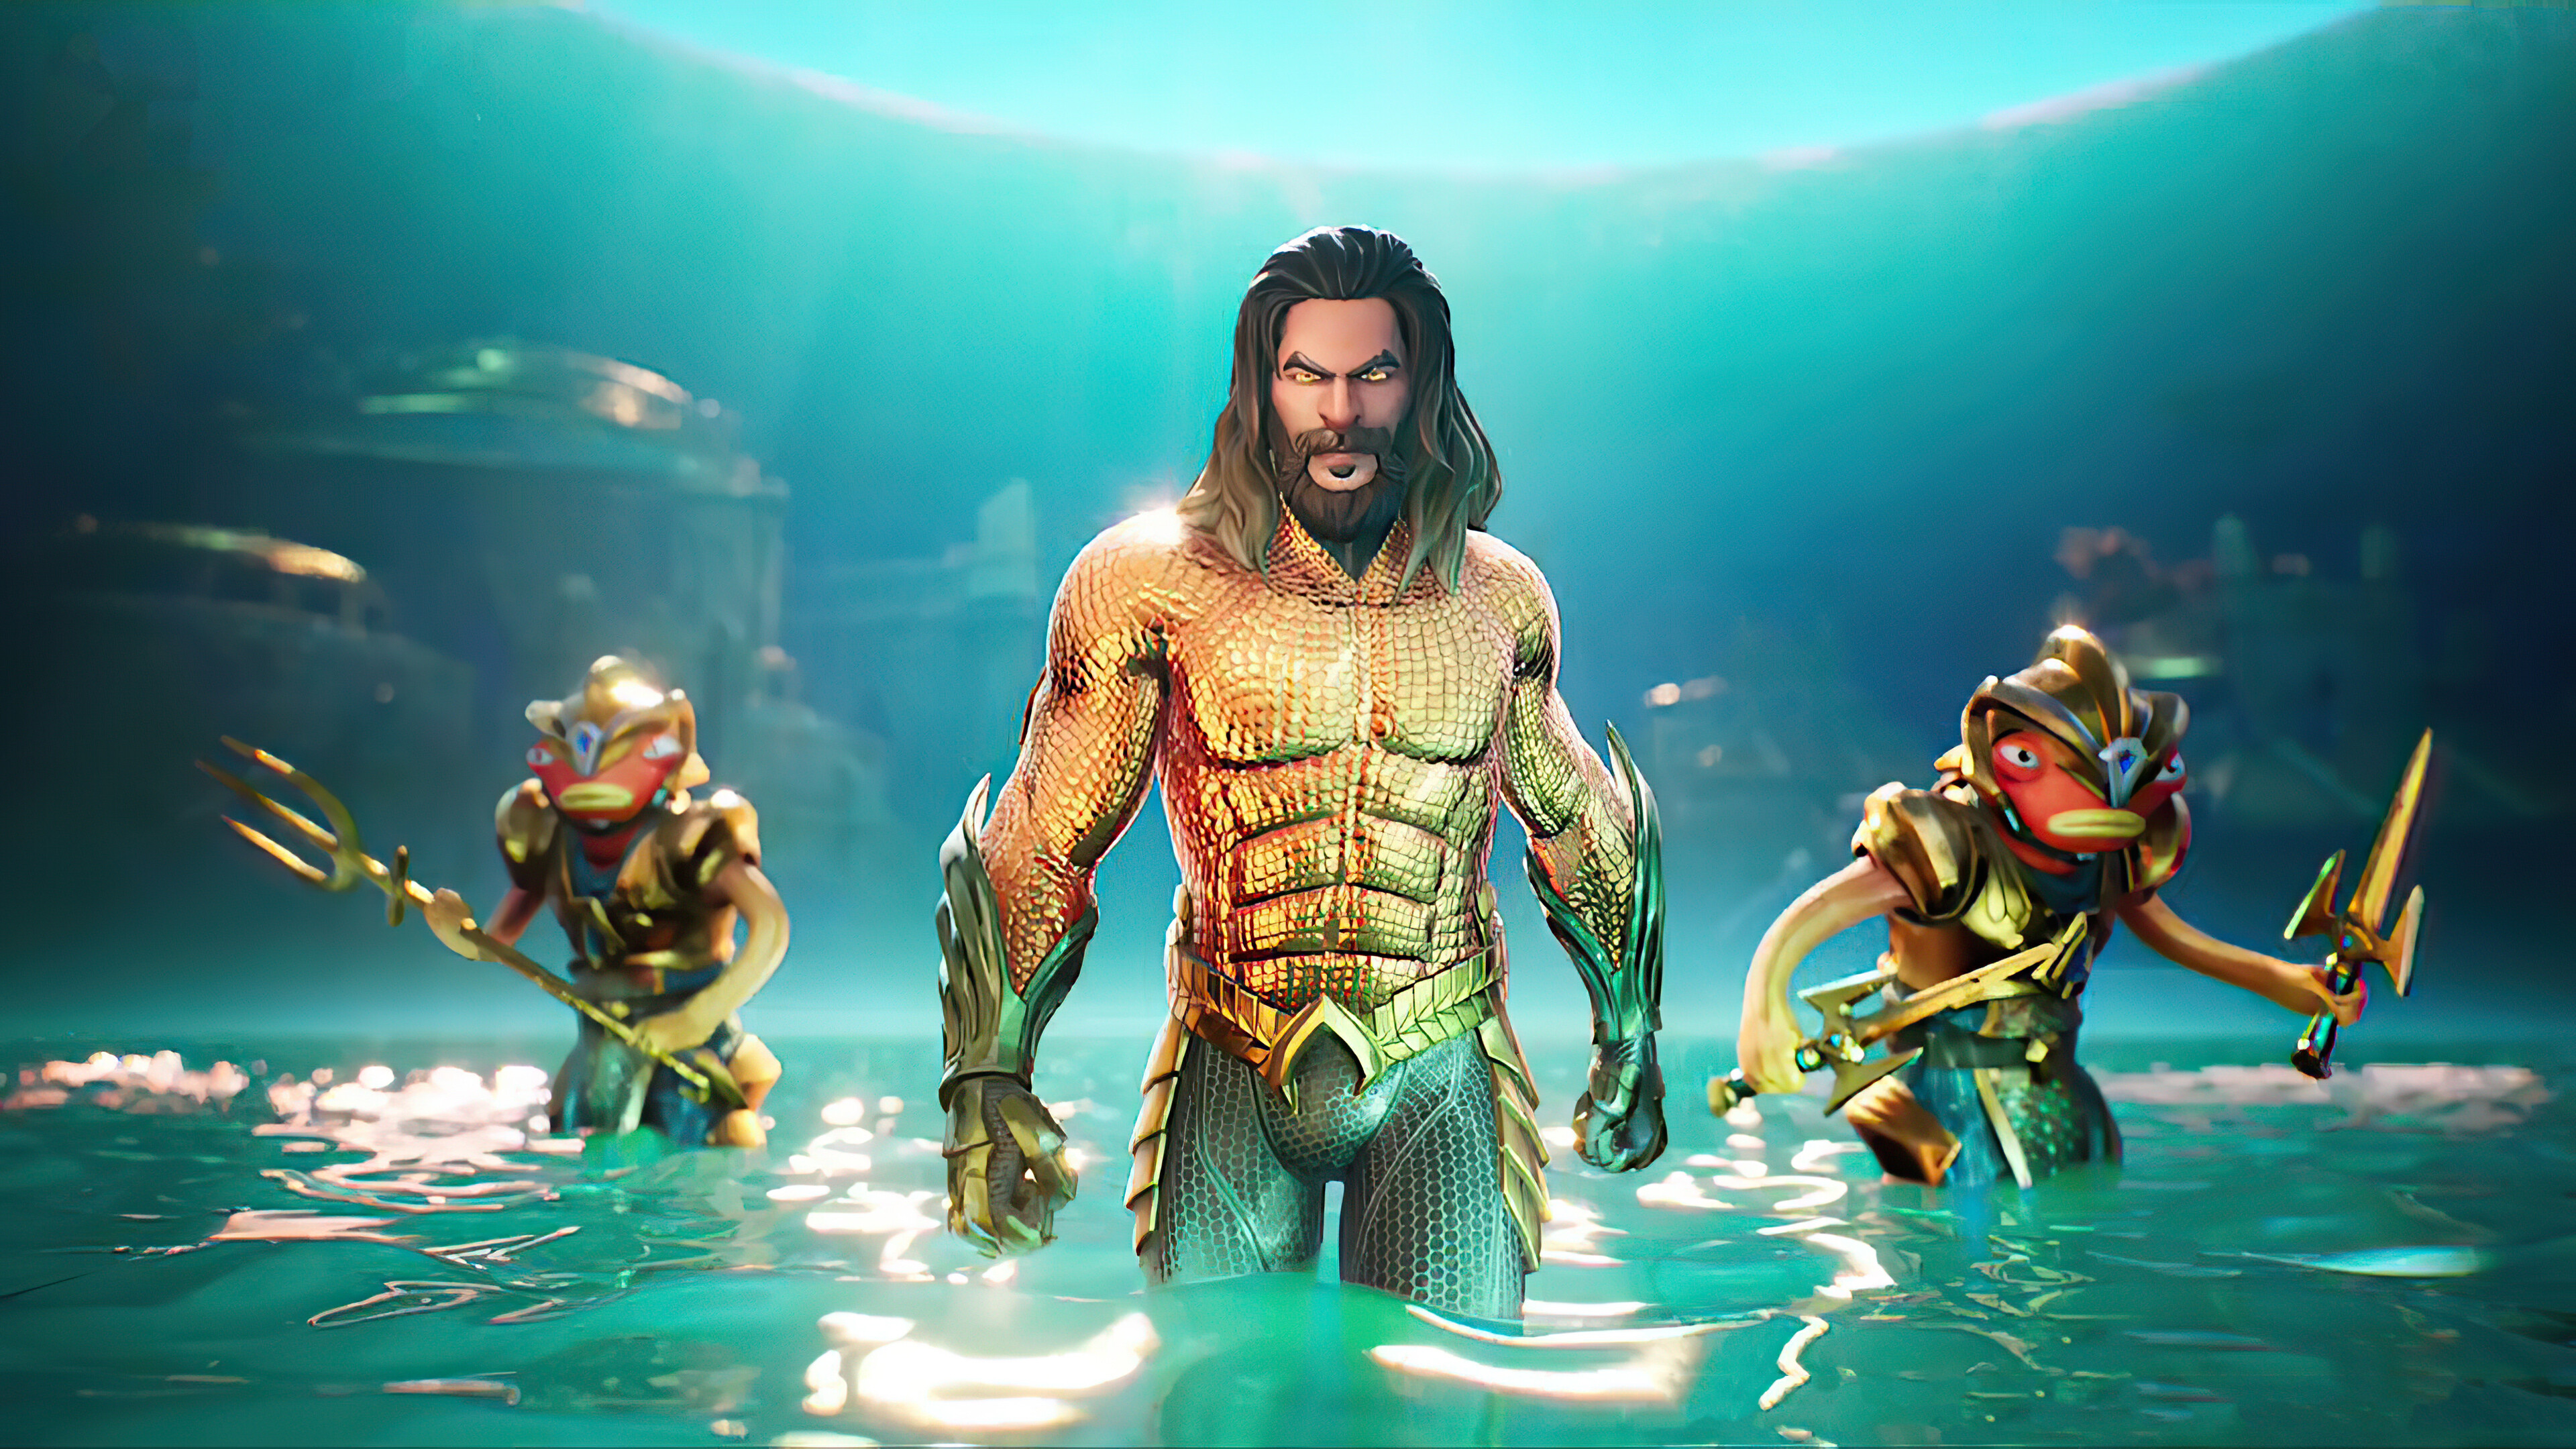 Fortnite: Aquaman, The special hero skin that can be earned in Chapter 2 Season 3. 3840x2160 4K Background.